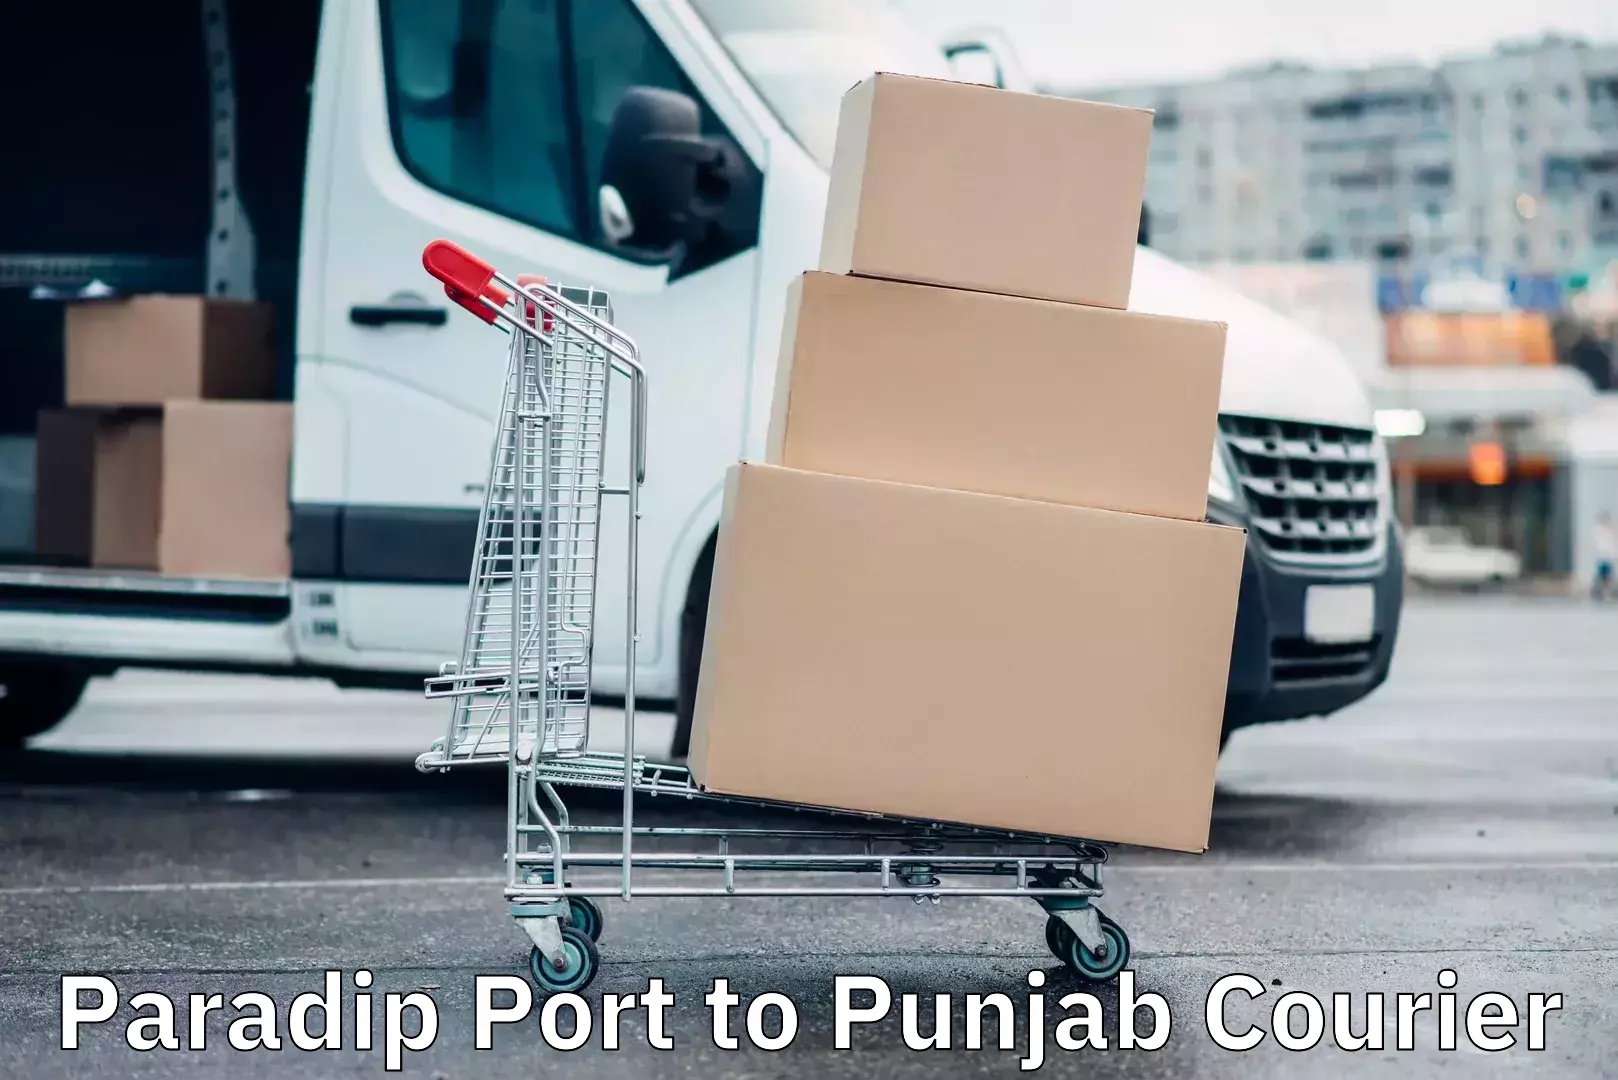 Flexible delivery schedules Paradip Port to Punjab